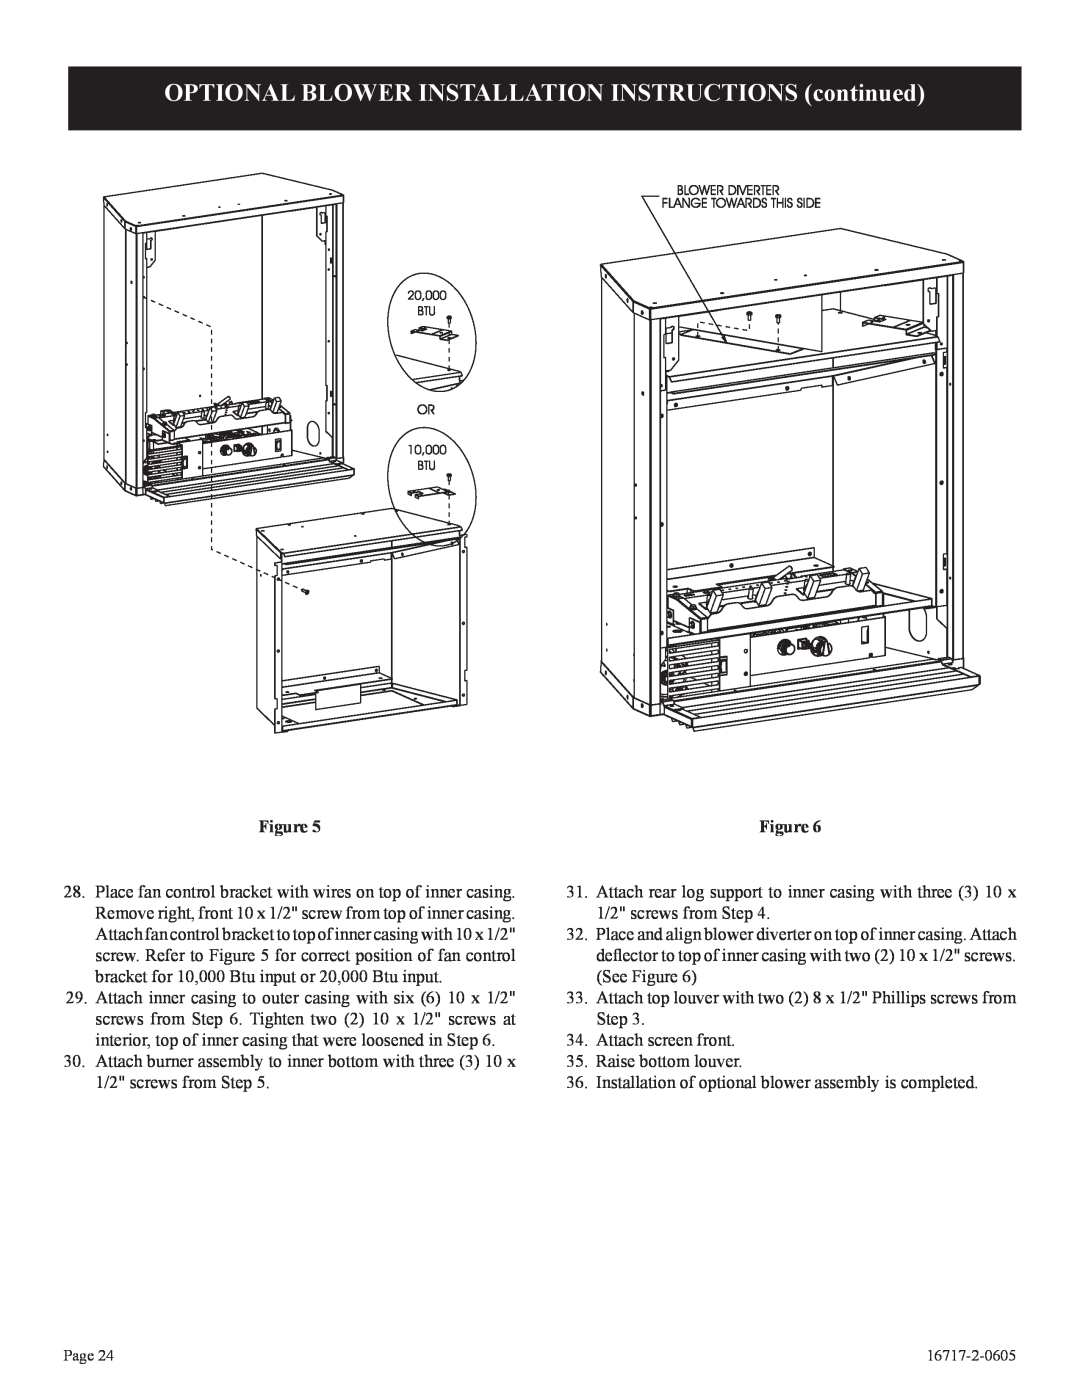 Empire Comfort Systems VFHS-20R-4, VFHS-20/10T-4 installation instructions Attach screen front 35.Raise bottom louver 